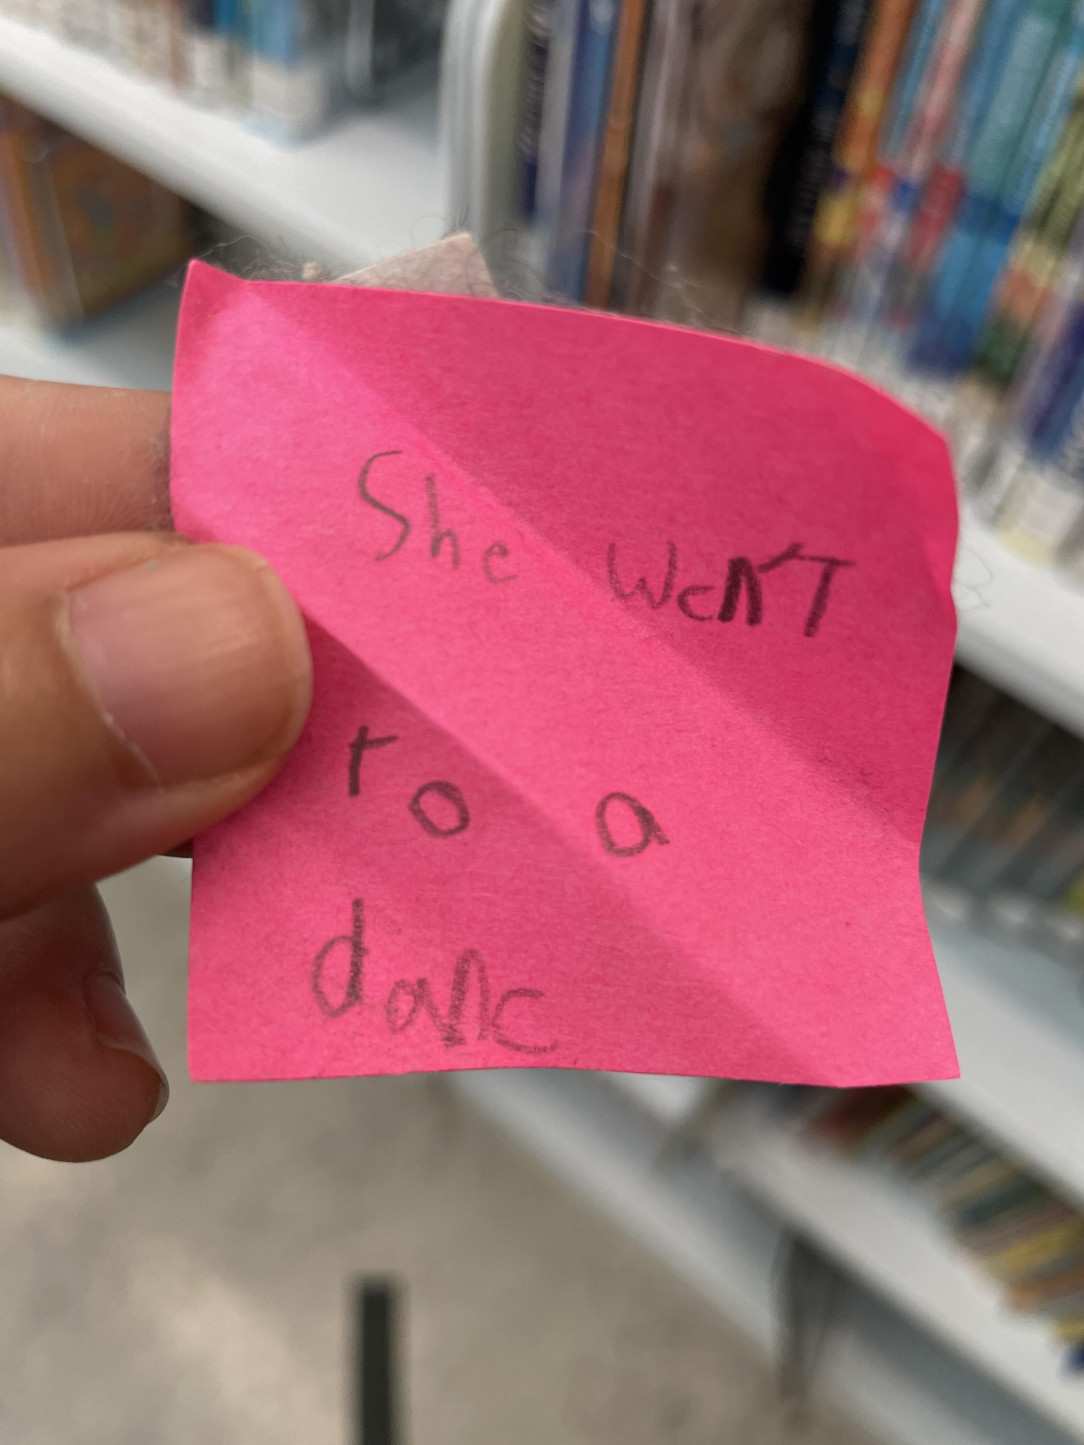 She went to a danc